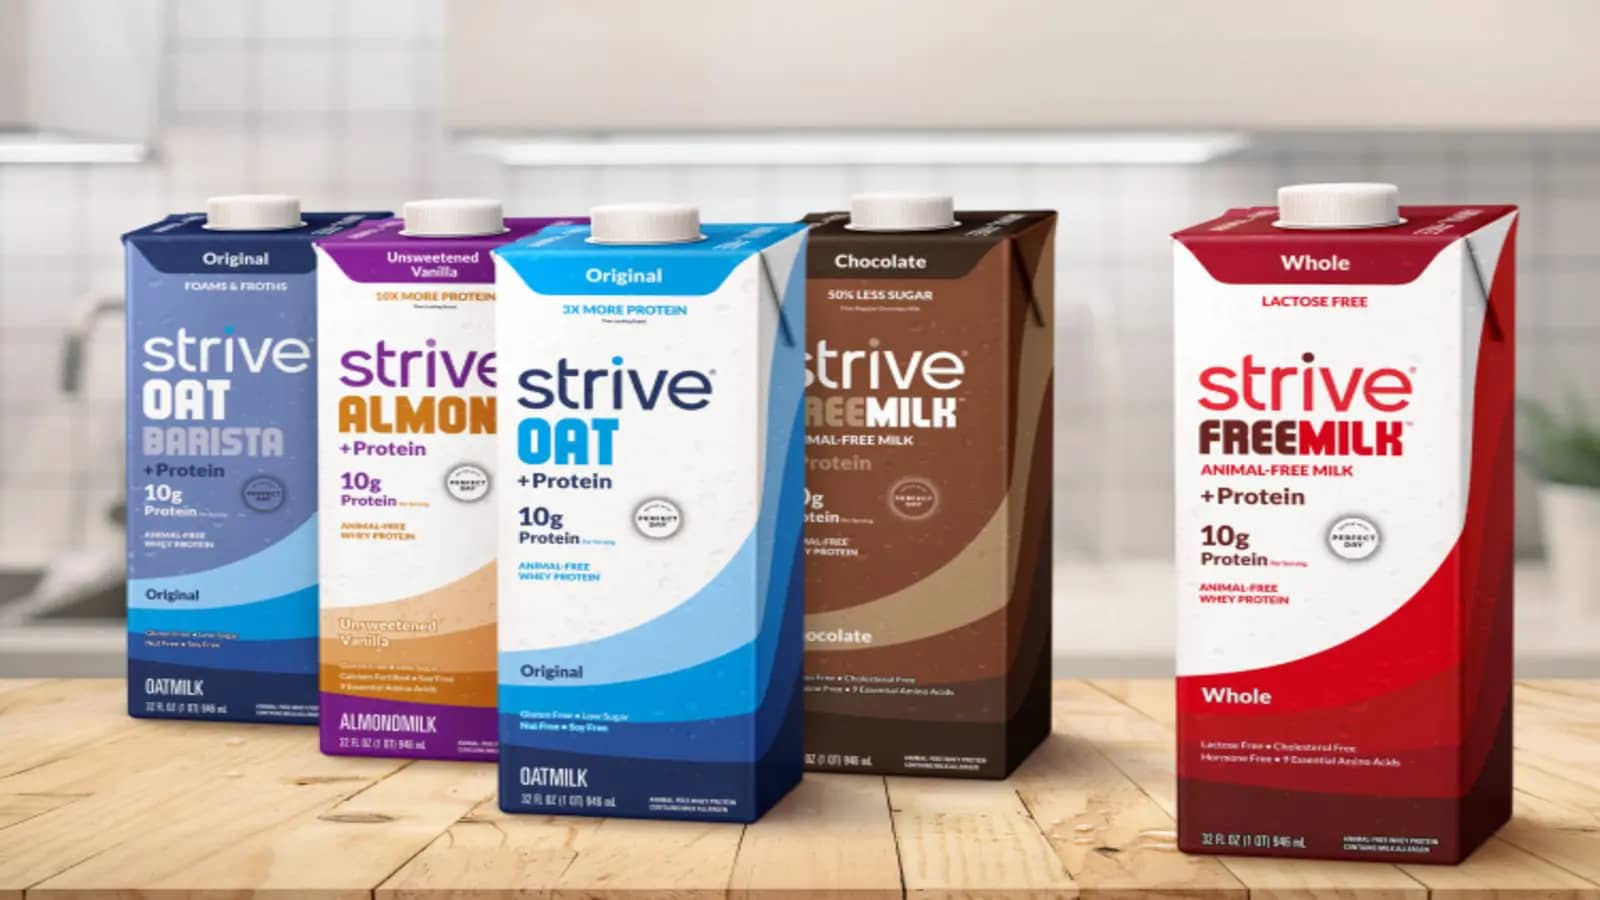 Perfect day partners Strive Nutrition to launch milk alternatives line in US